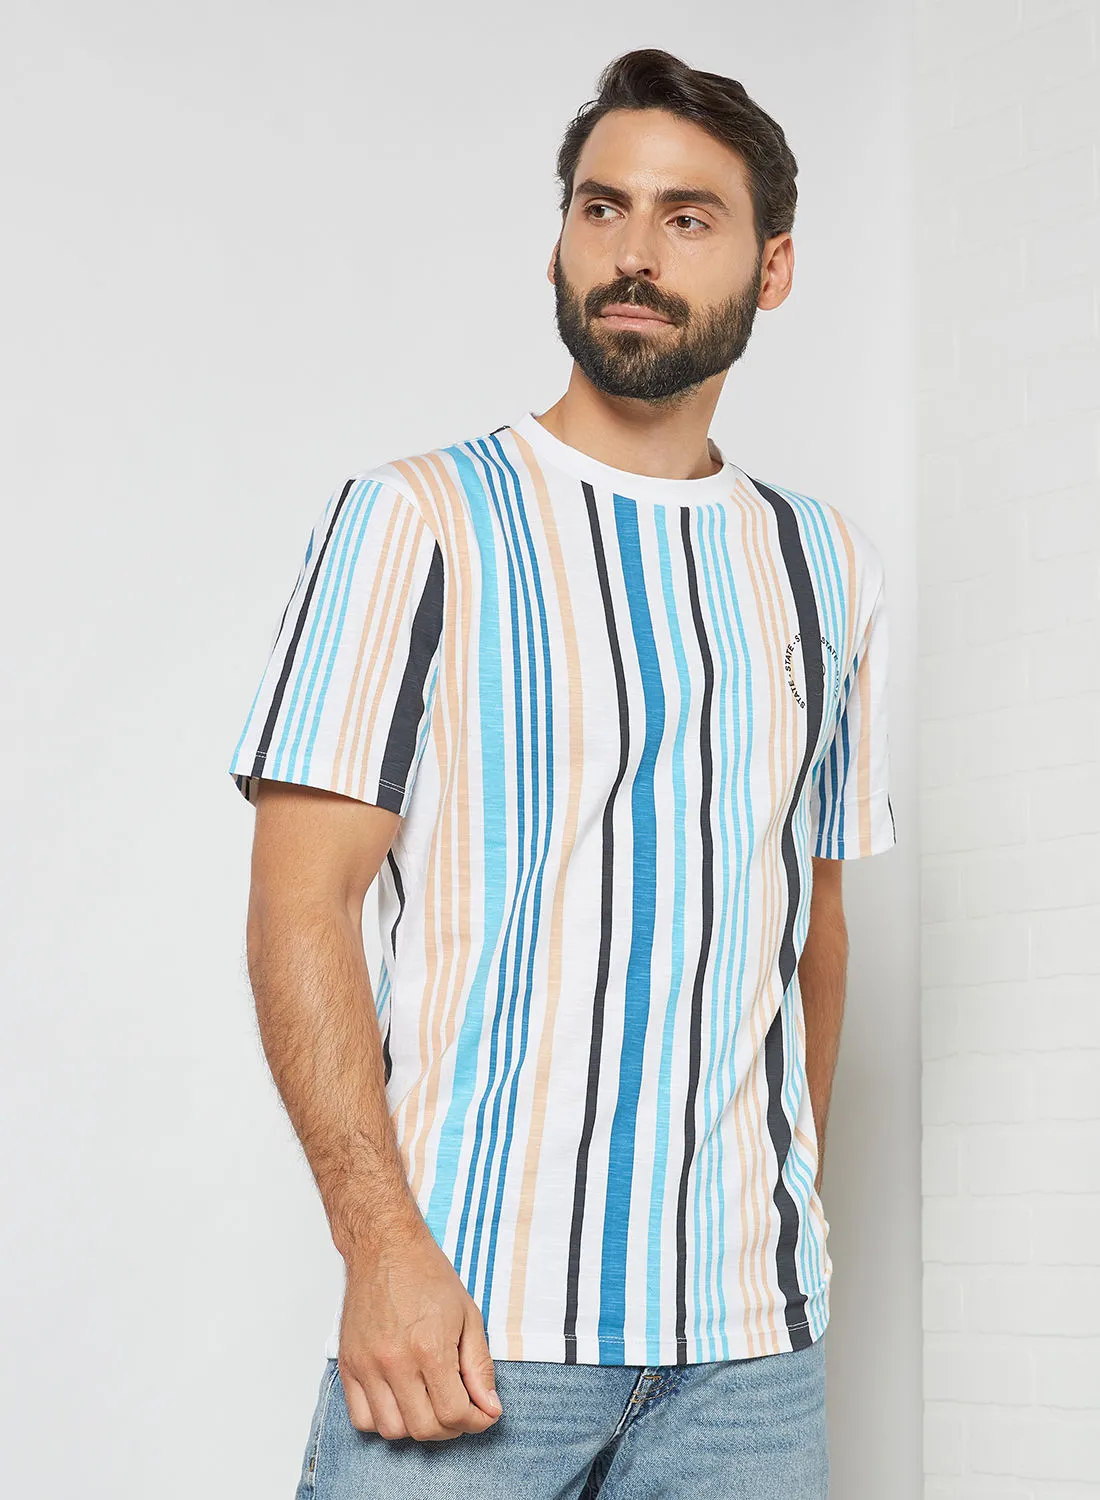 STATE 8 All-Over Stripe T-Shirt Beige/Blue Stripes